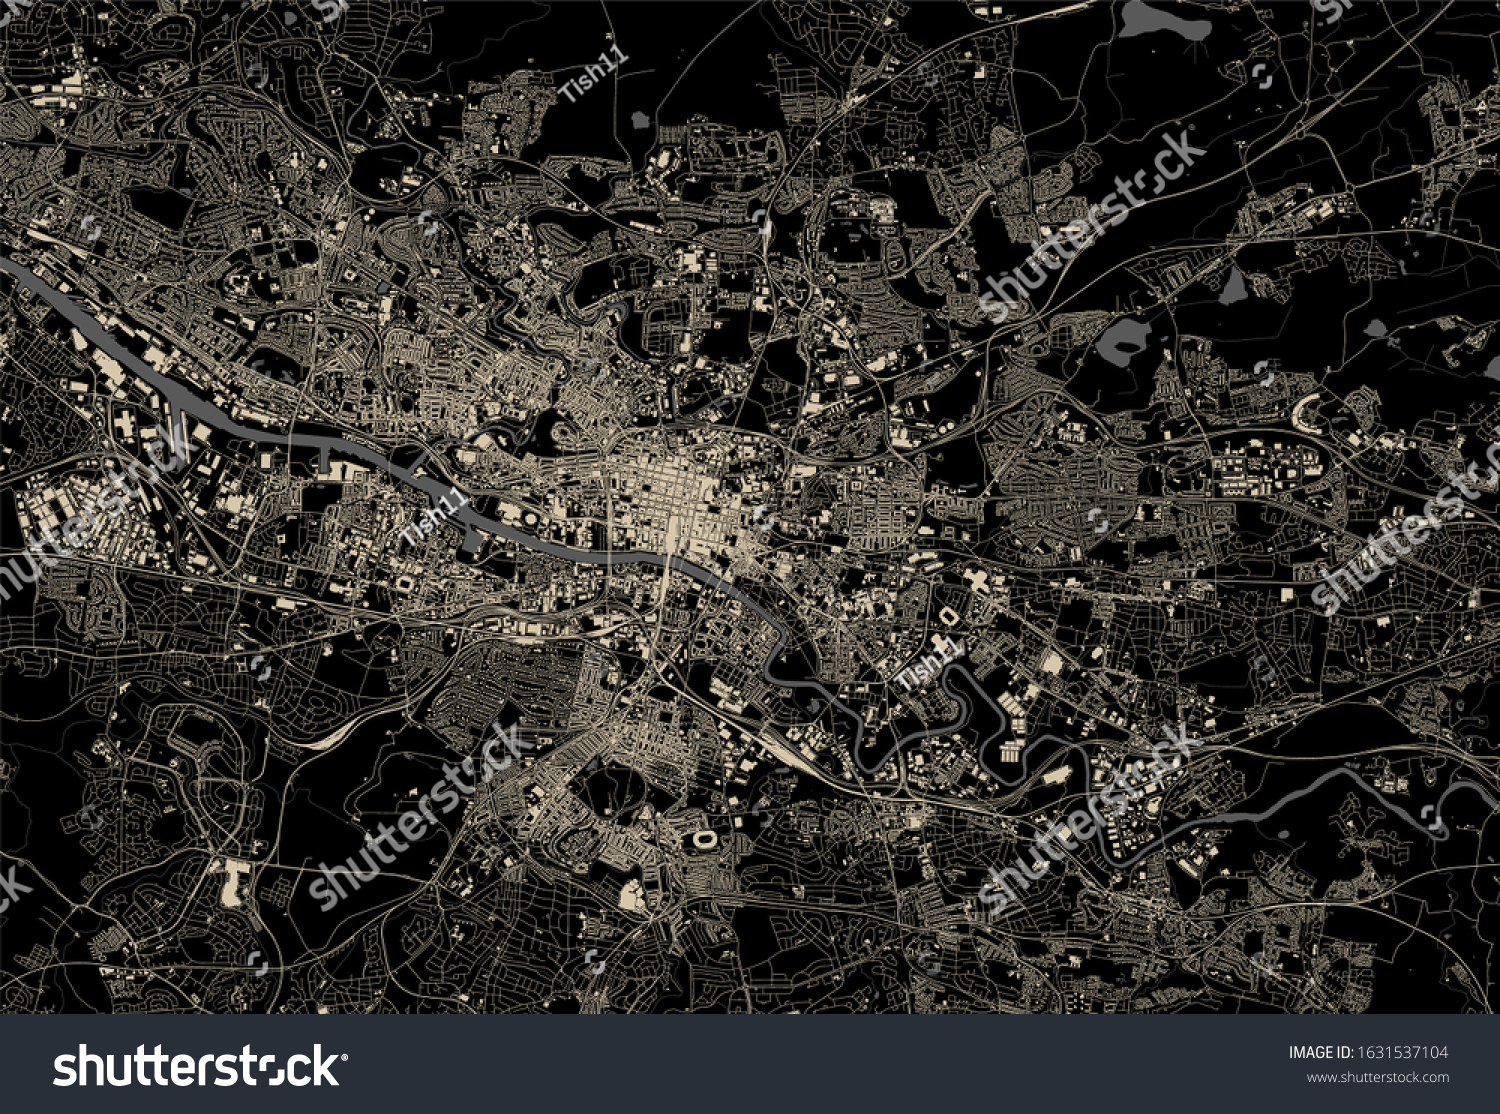 SVG of vector map of the city of Glasgow, Scotland, UK svg